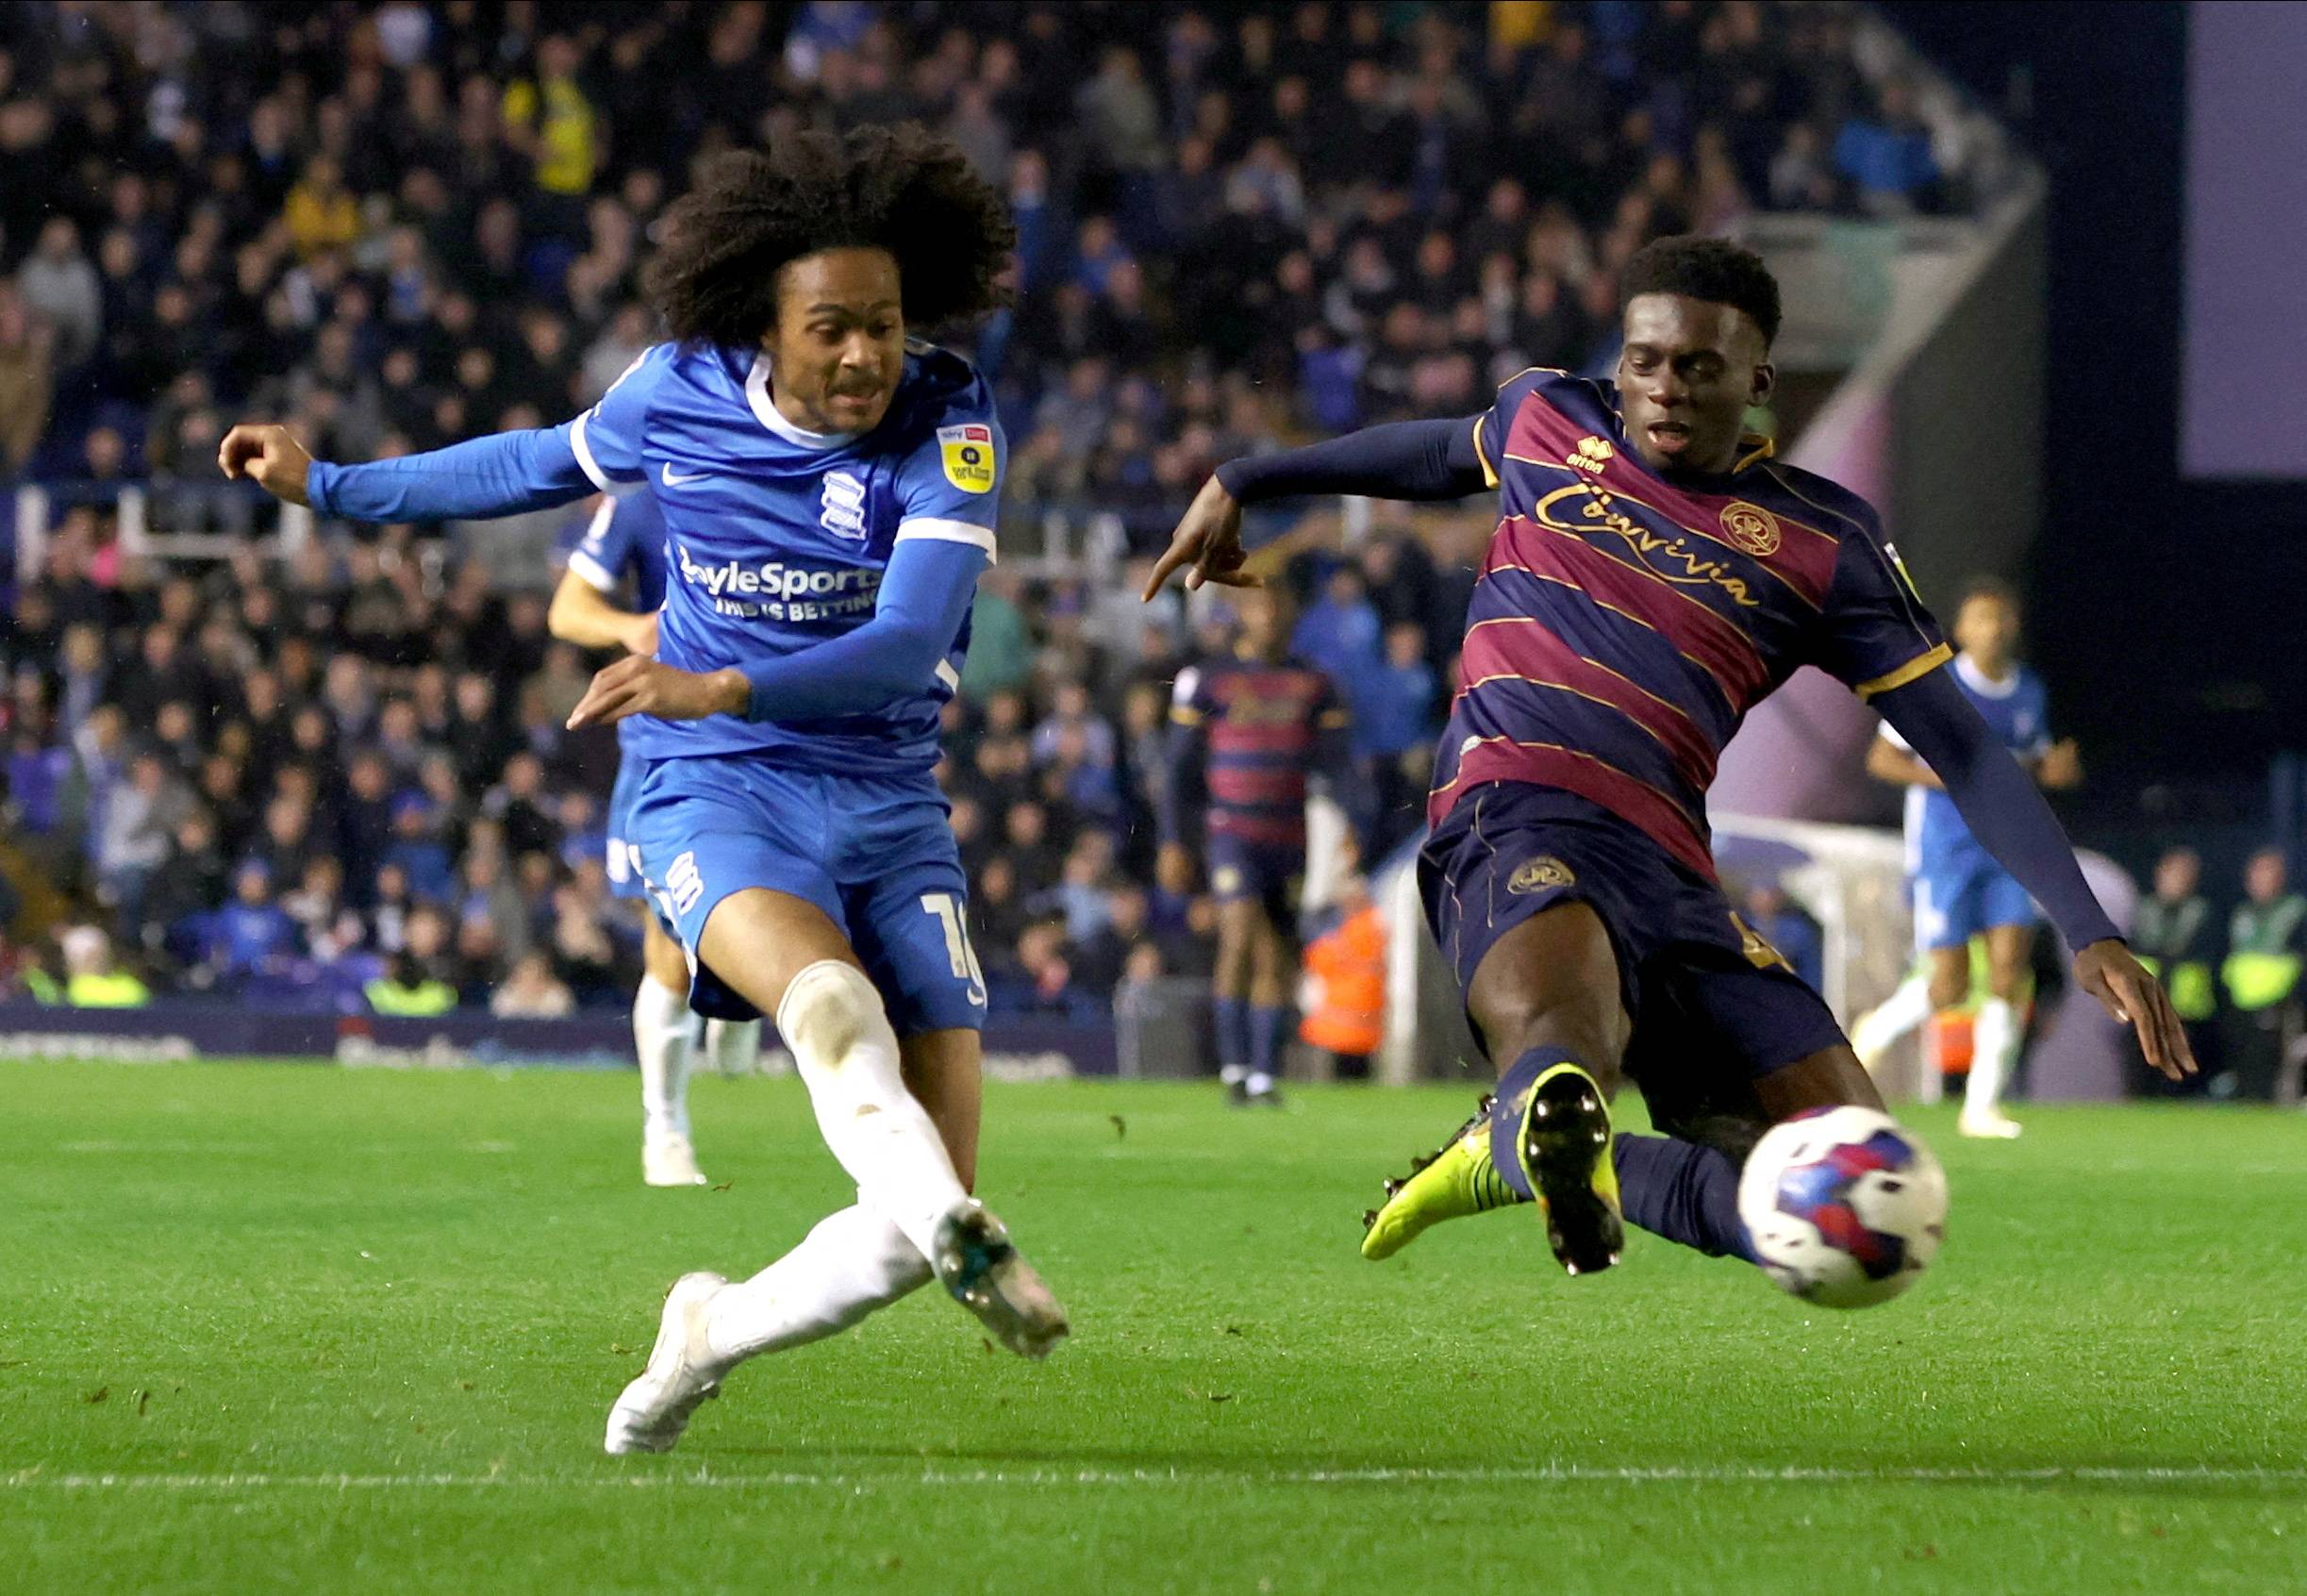 Sheffield Wednesday: Sinclair Armstrong 'not available' for loan move - League One News